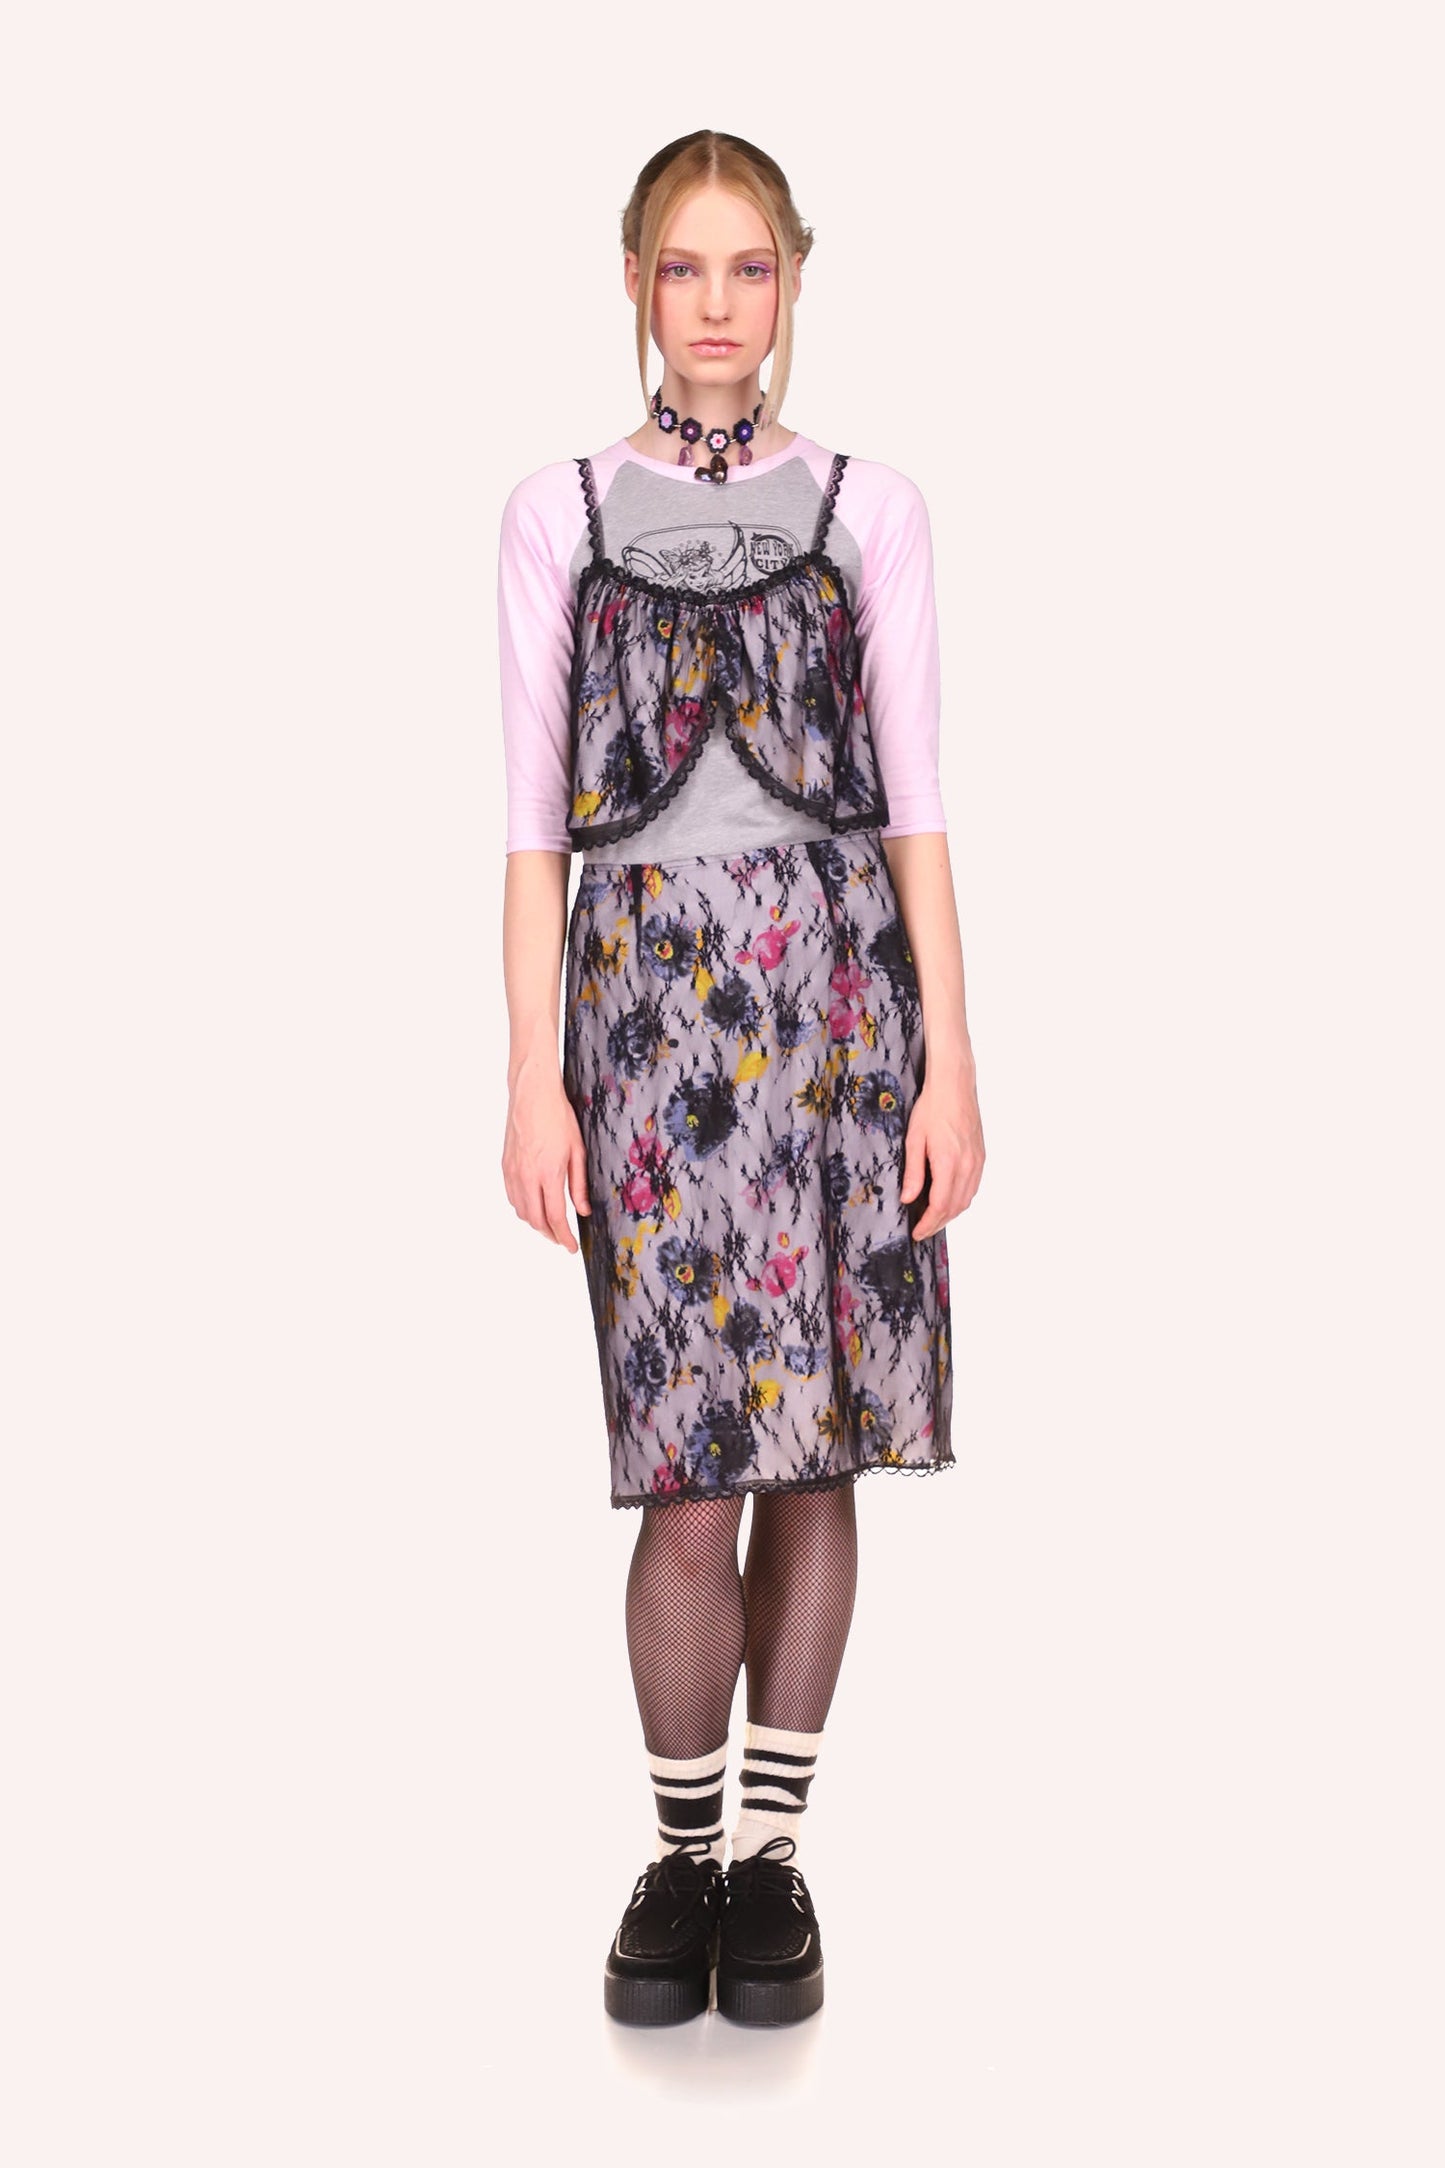 Anna Sui Knee-long skirt, pattern of lilac, pink, and yellow colors flowers, bottom, and side hems in black lace